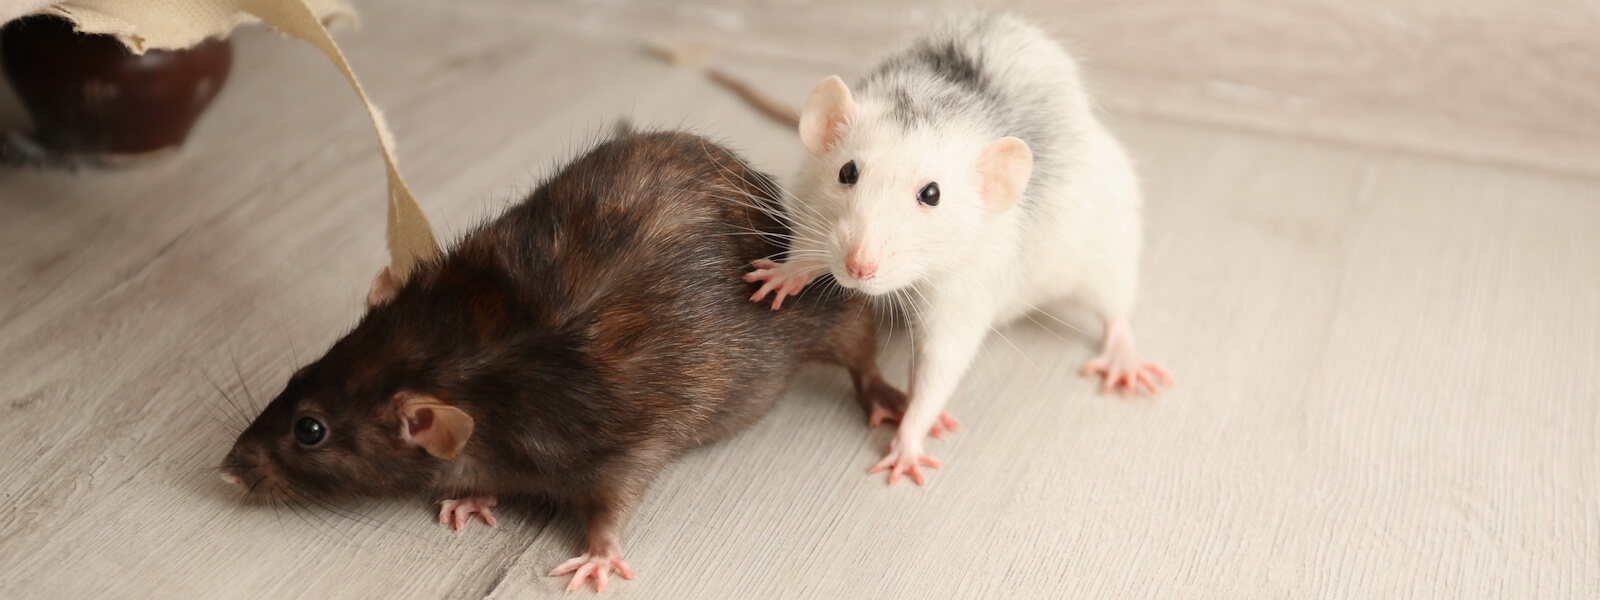 Rats and Mice destroying furniture in household